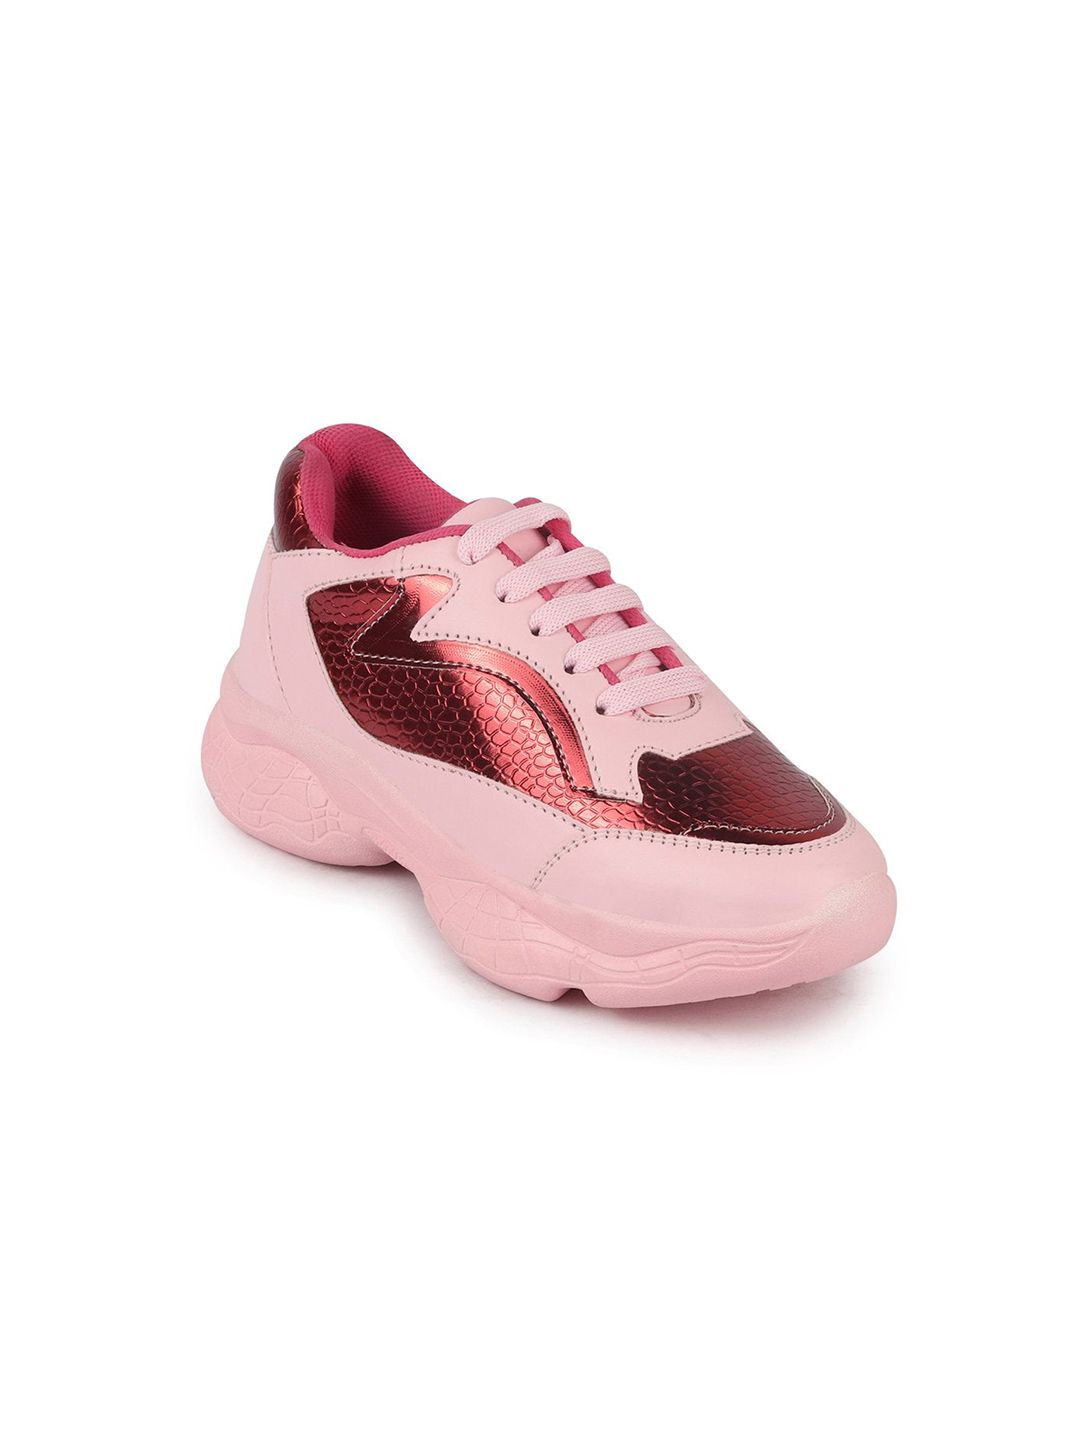 FAUSTO Women Pink & Copper Running Non-Marking Shoes Price in India